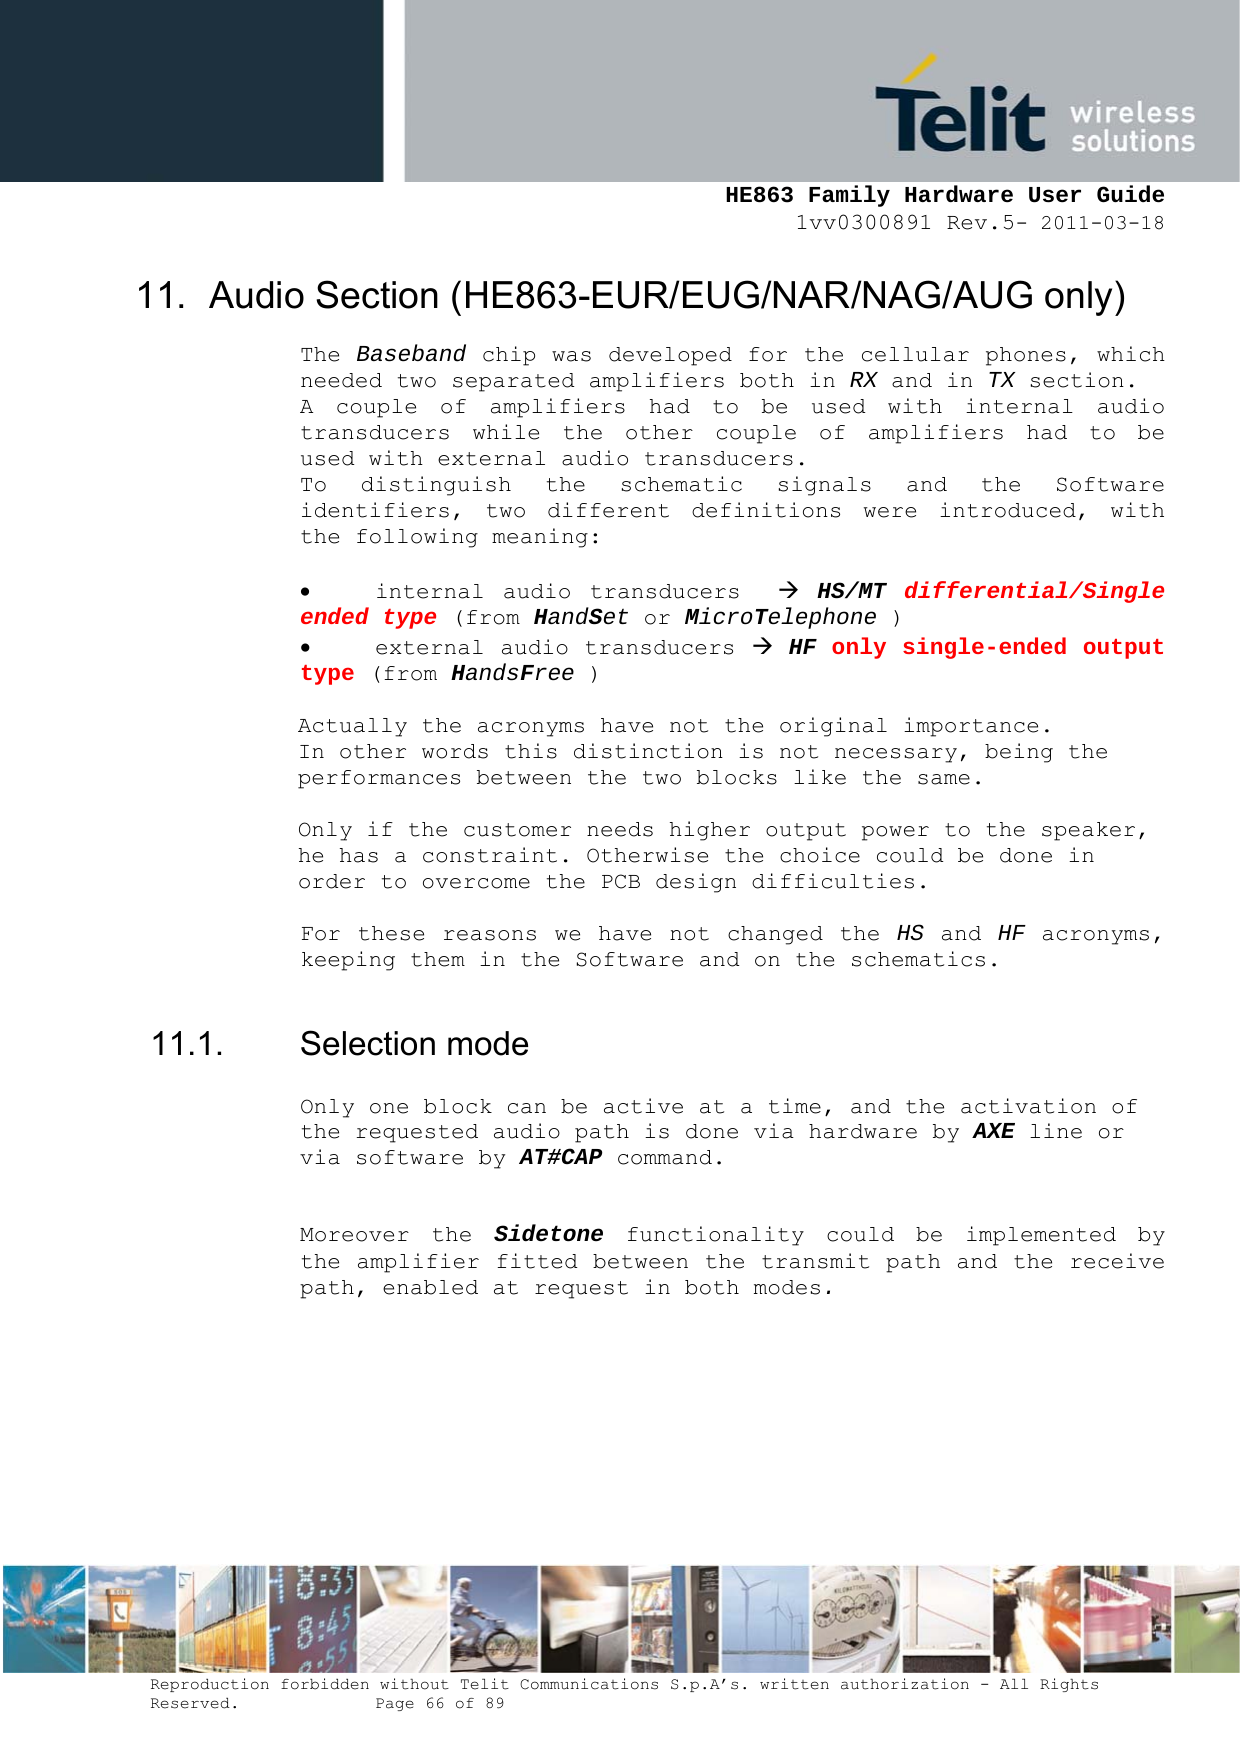     HE863 Family Hardware User Guide 1vv0300891 Rev.5- 2011-03-18    Reproduction forbidden without Telit Communications S.p.A’s. written authorization - All Rights Reserved.    Page 66 of 89  11.  Audio Section (HE863-EUR/EUG/NAR/NAG/AUG only) The Baseband chip was developed for the cellular phones, which needed two separated amplifiers both in RX and in TX section. A couple of amplifiers had to be used with internal audio transducers while the other couple of amplifiers had to be used with external audio transducers. To distinguish the schematic signals and the Software identifiers, two different definitions were introduced, with the following meaning:   internal audio transducers   HS/MT  differential/Single ended type (from HandSet or MicroTelephone )  external audio transducers  HF only single-ended output type (from HandsFree )     Actually the acronyms have not the original importance.  In other words this distinction is not necessary, being the performances between the two blocks like the same.  Only if the customer needs higher output power to the speaker, he has a constraint. Otherwise the choice could be done in order to overcome the PCB design difficulties.   For these reasons we have not changed the HS and HF acronyms, keeping them in the Software and on the schematics.   11.1. Selection mode Only one block can be active at a time, and the activation of the requested audio path is done via hardware by AXE line or via software by AT#CAP command.  Moreover the Sidetone functionality could be implemented by the amplifier fitted between the transmit path and the receive path, enabled at request in both modes.       